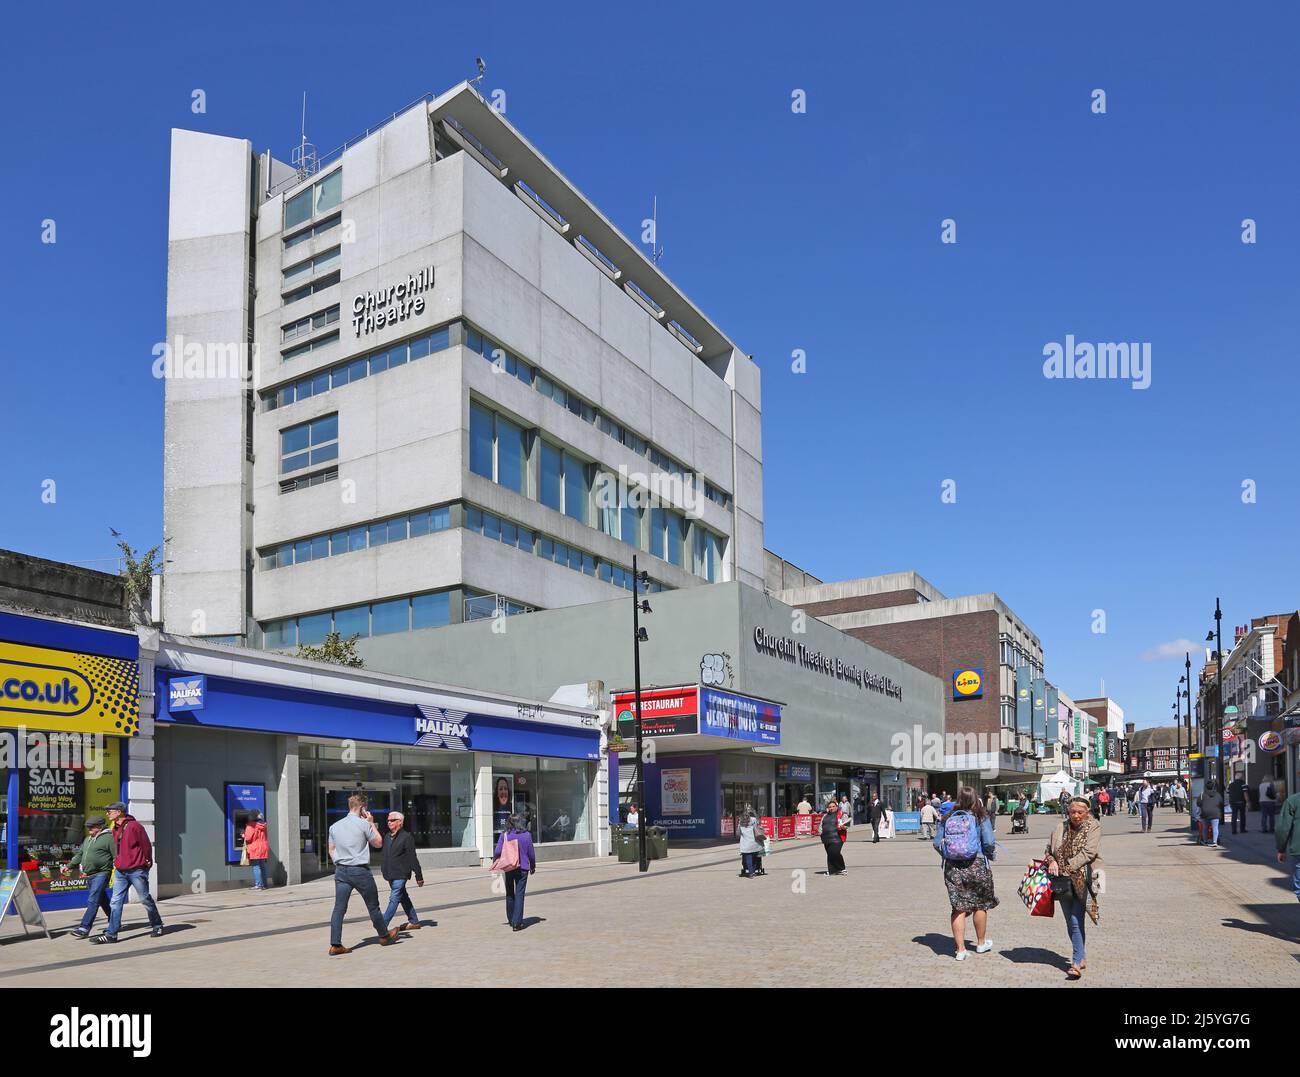 Bromley town centre, busy shopping street. Shows pedestrianised area of the High Street and Churchill Theatre. Stock Photo